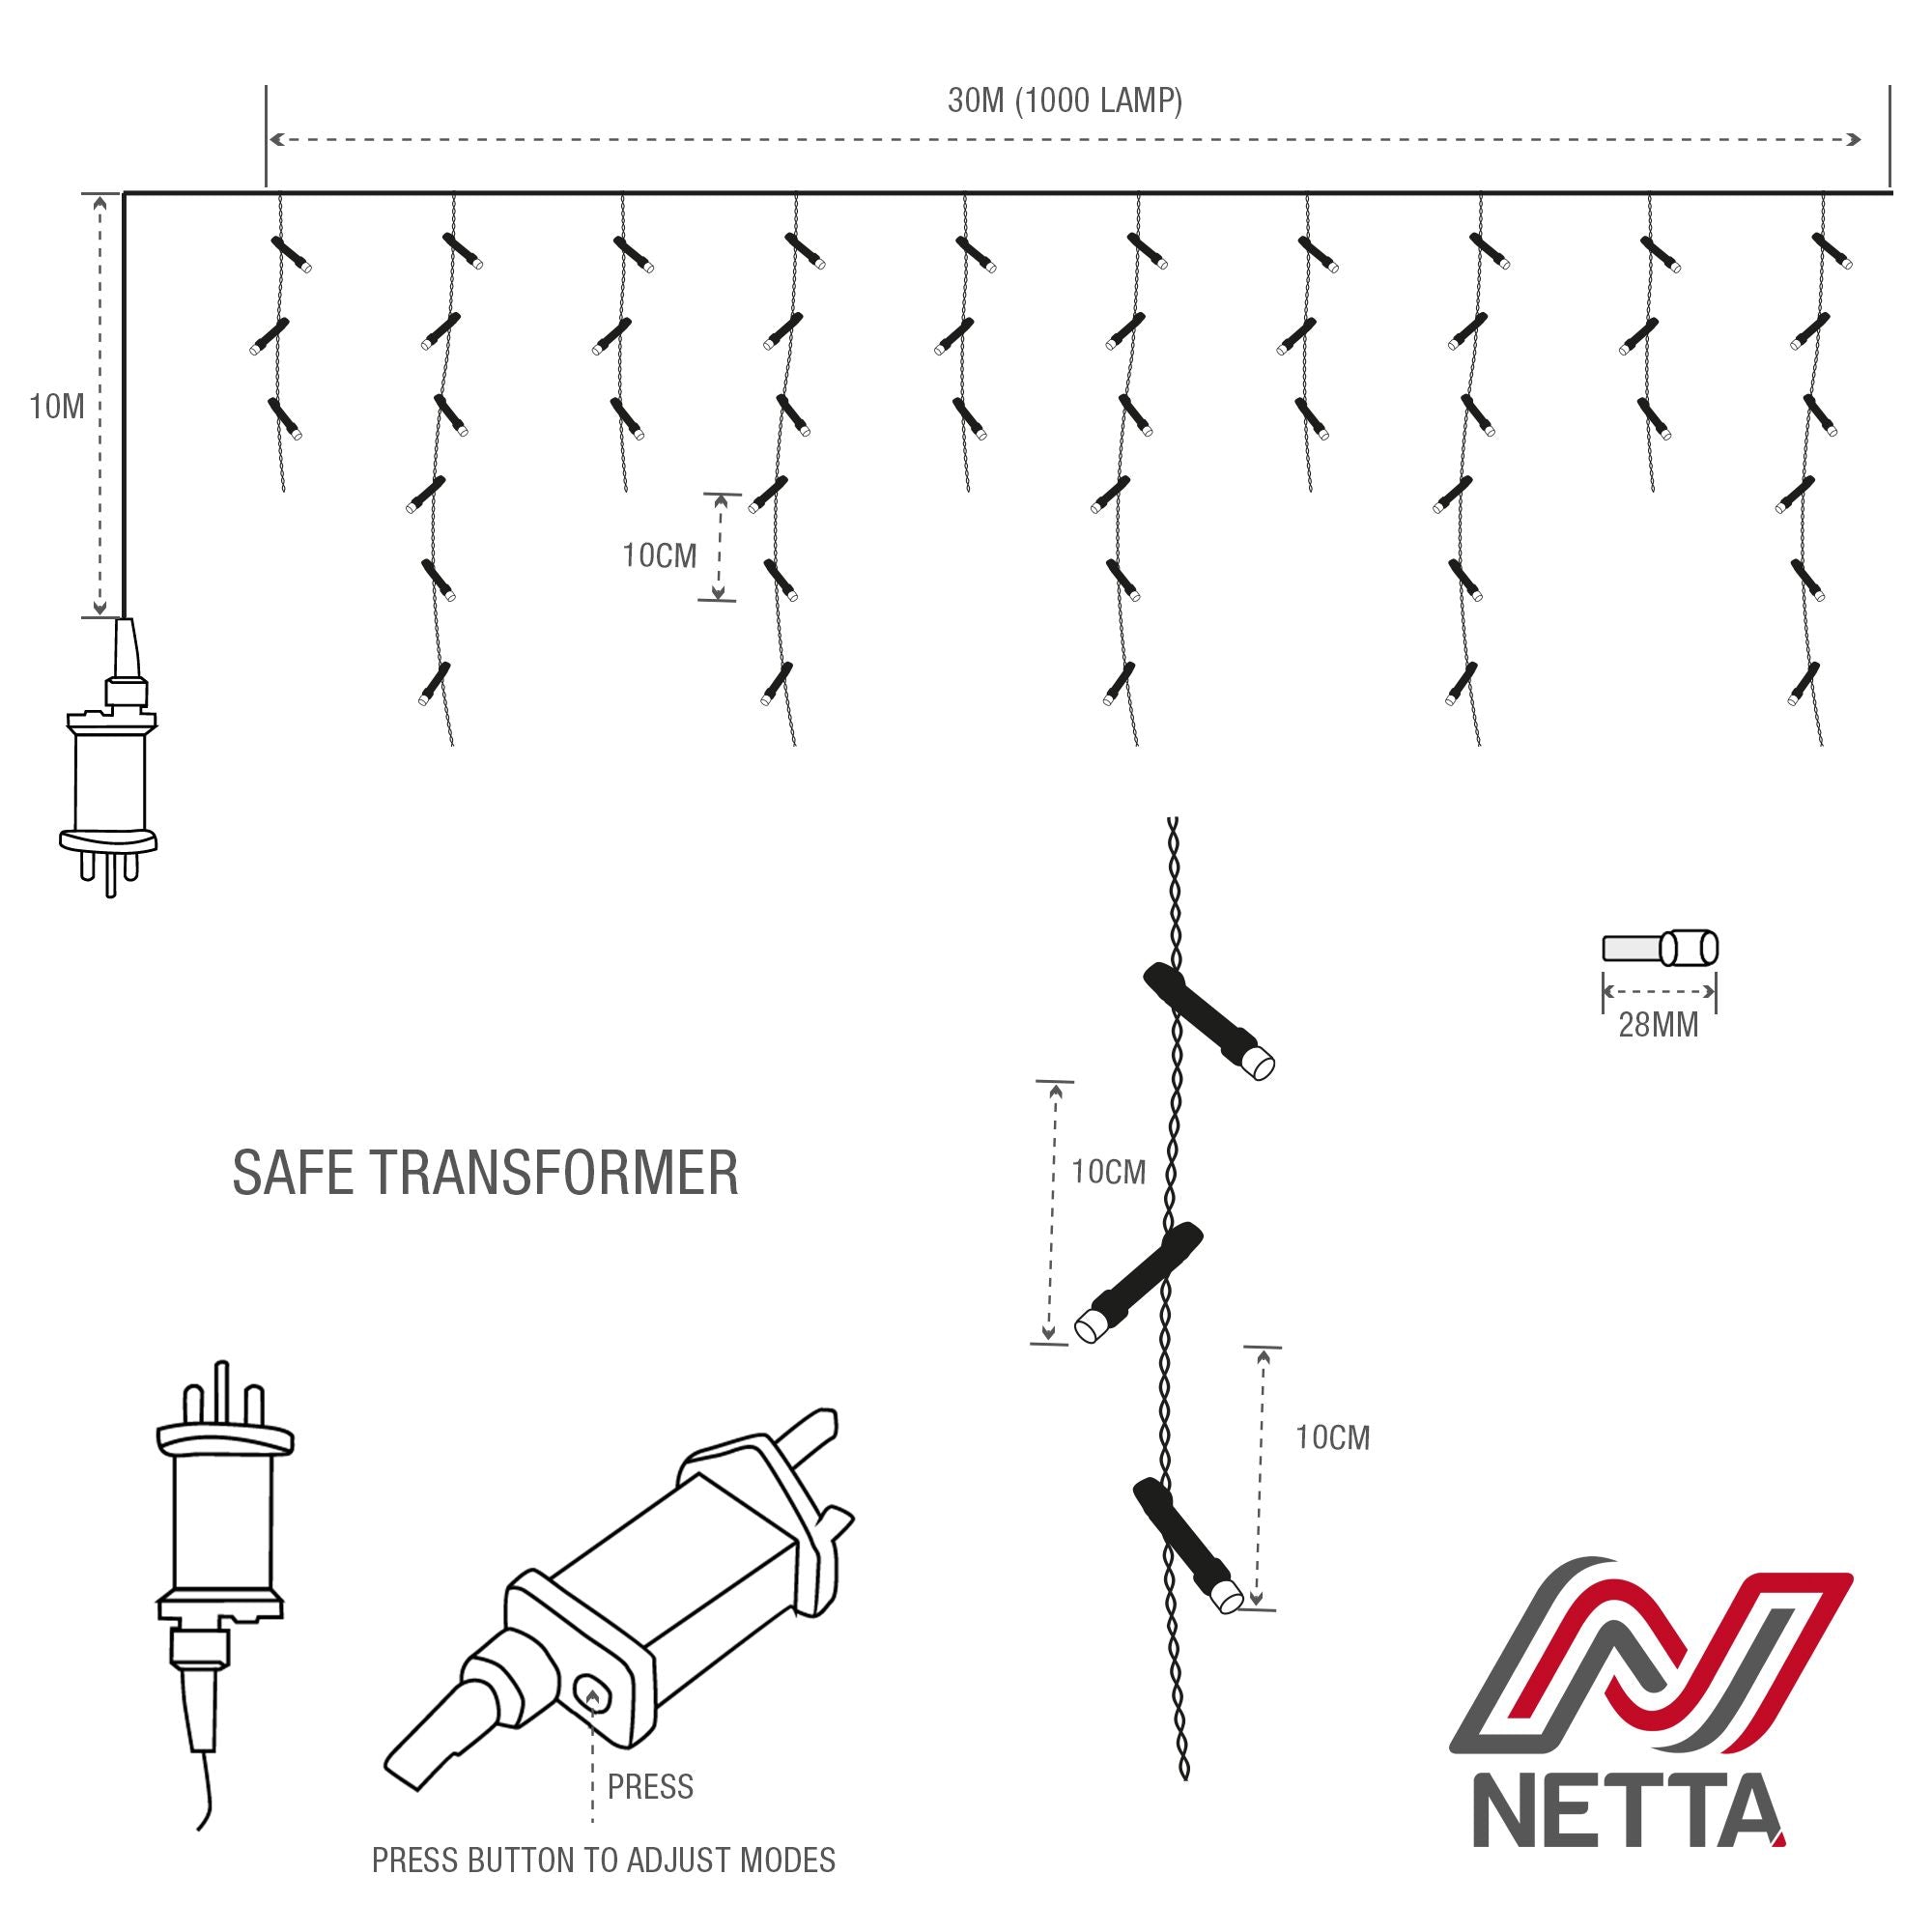 NETTA 1000 LED Icicle Lights 30M Outdoor - Warm White, with White Cable